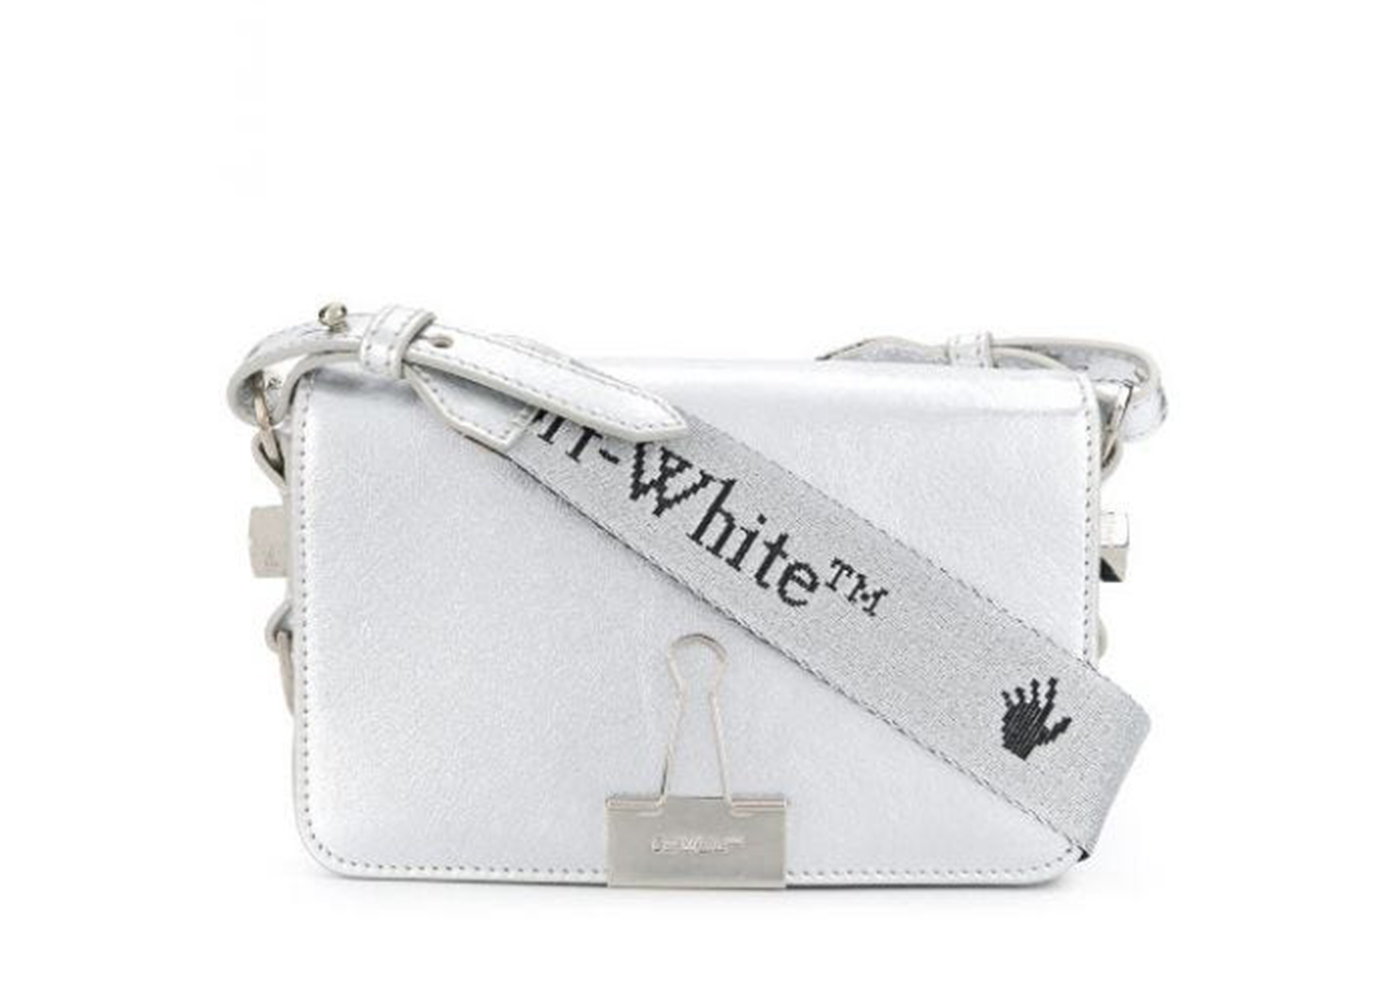 OFF-WHITE Diag FW20 Flap Bag Mini Silver in Leather with Silver